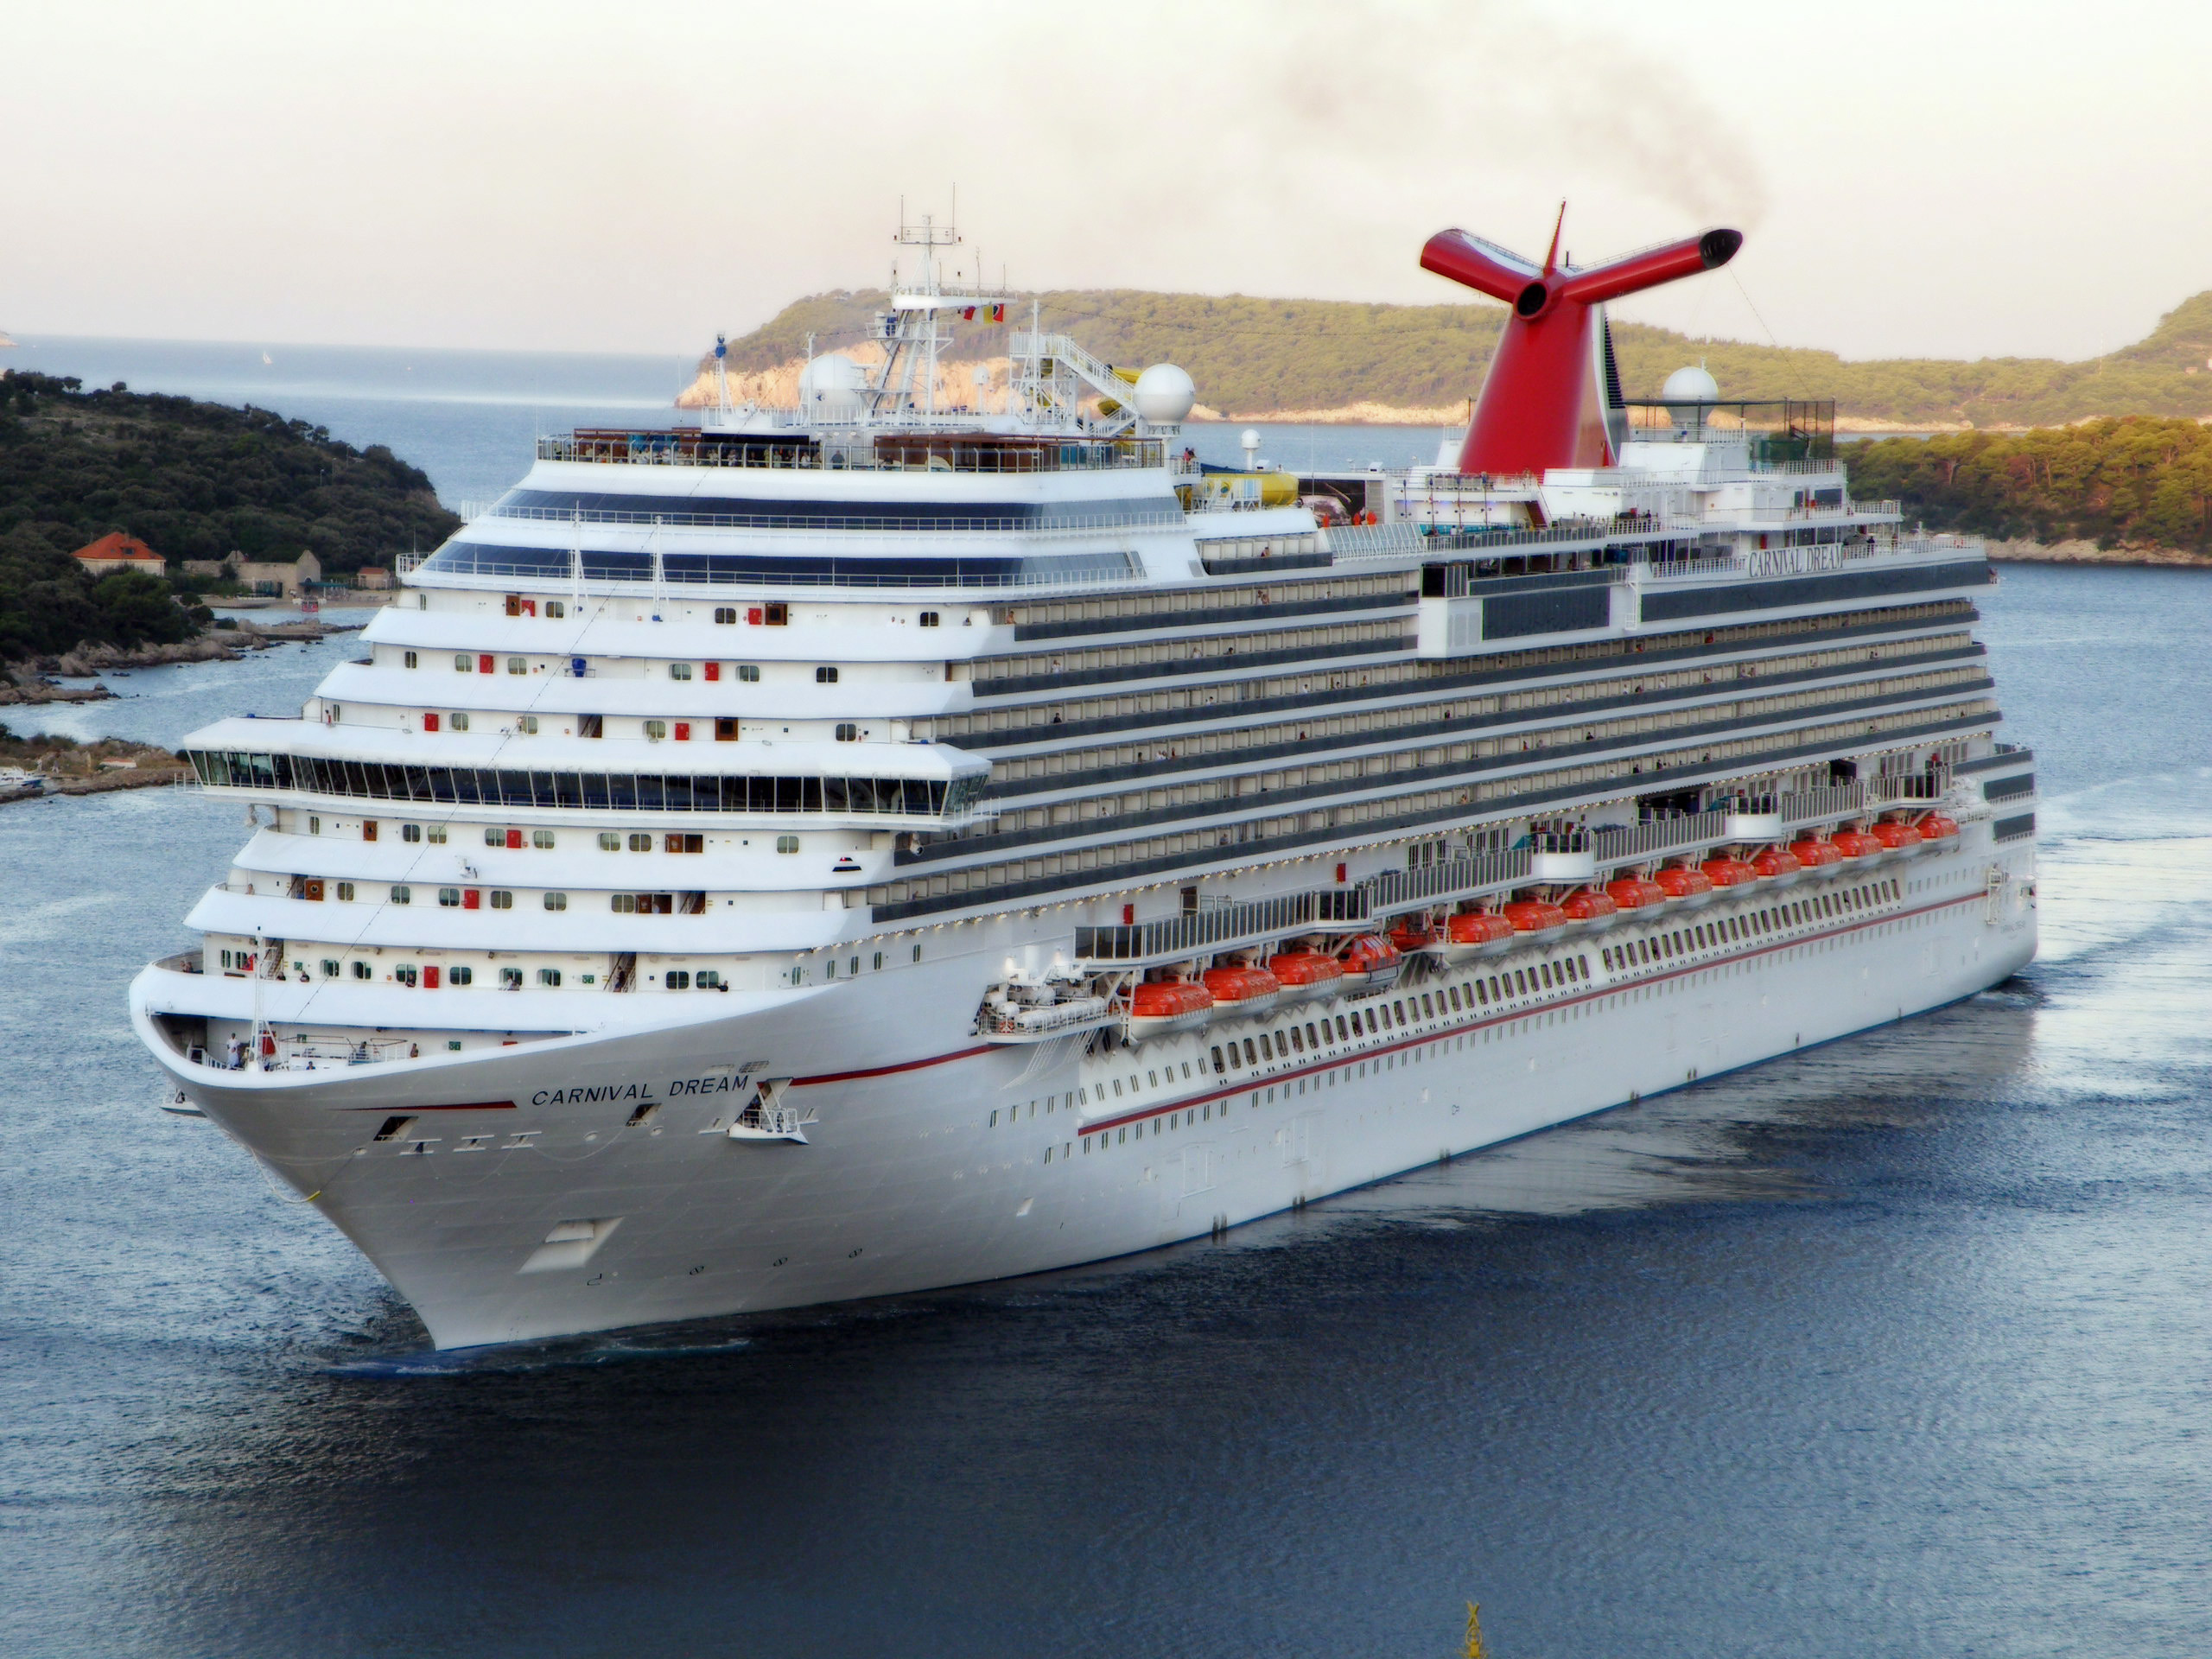 2560x1920 Carnival Dream Cruise Ship http://www.thewallpapers.org/1869/